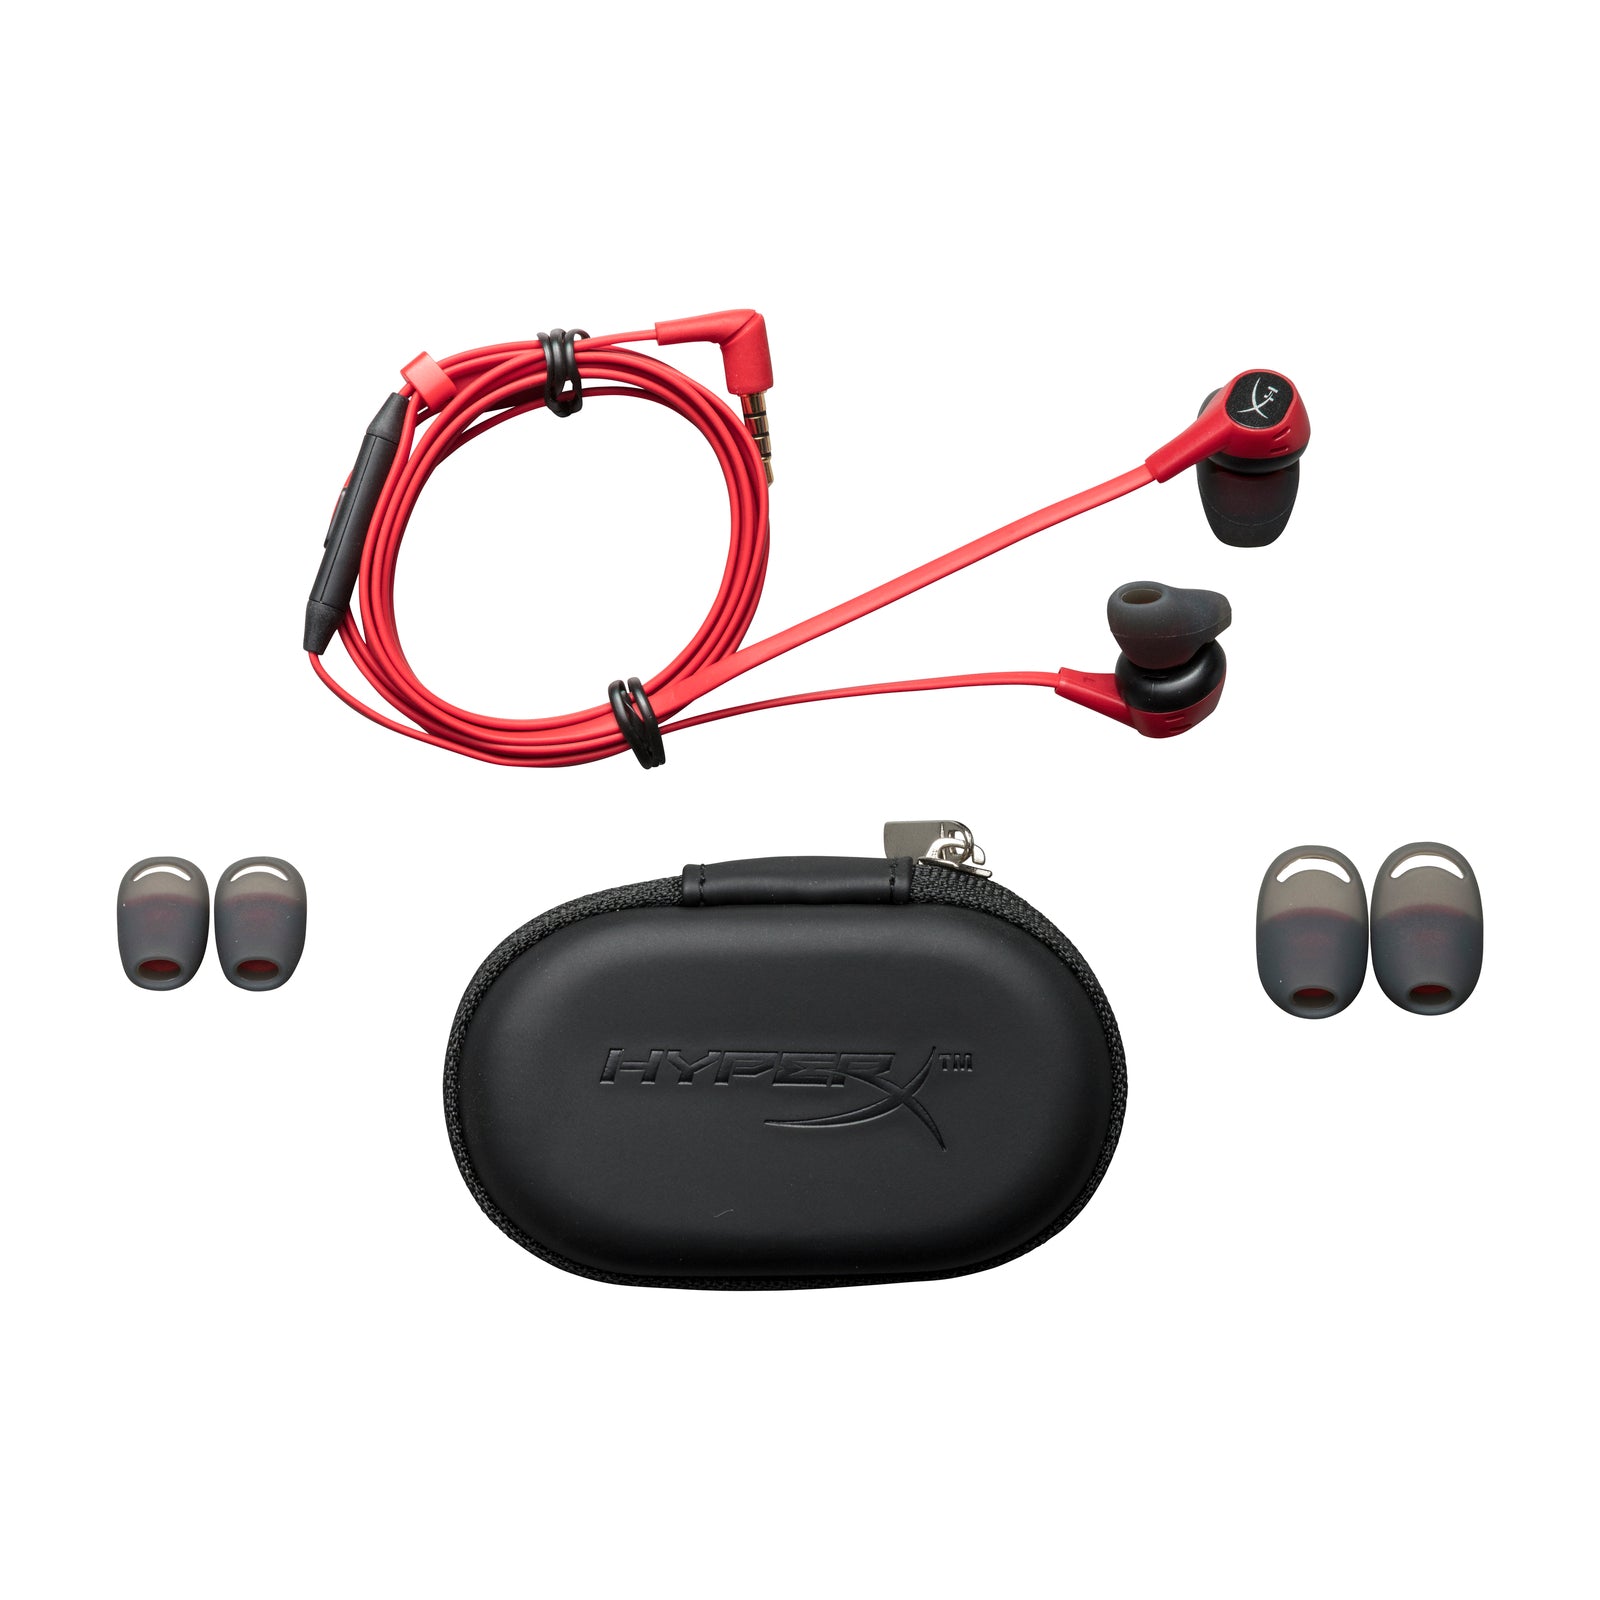 Black and Red HyperX Cloud Earbuds Main Product Image Detailing Box Contents Including Case and Earbuds